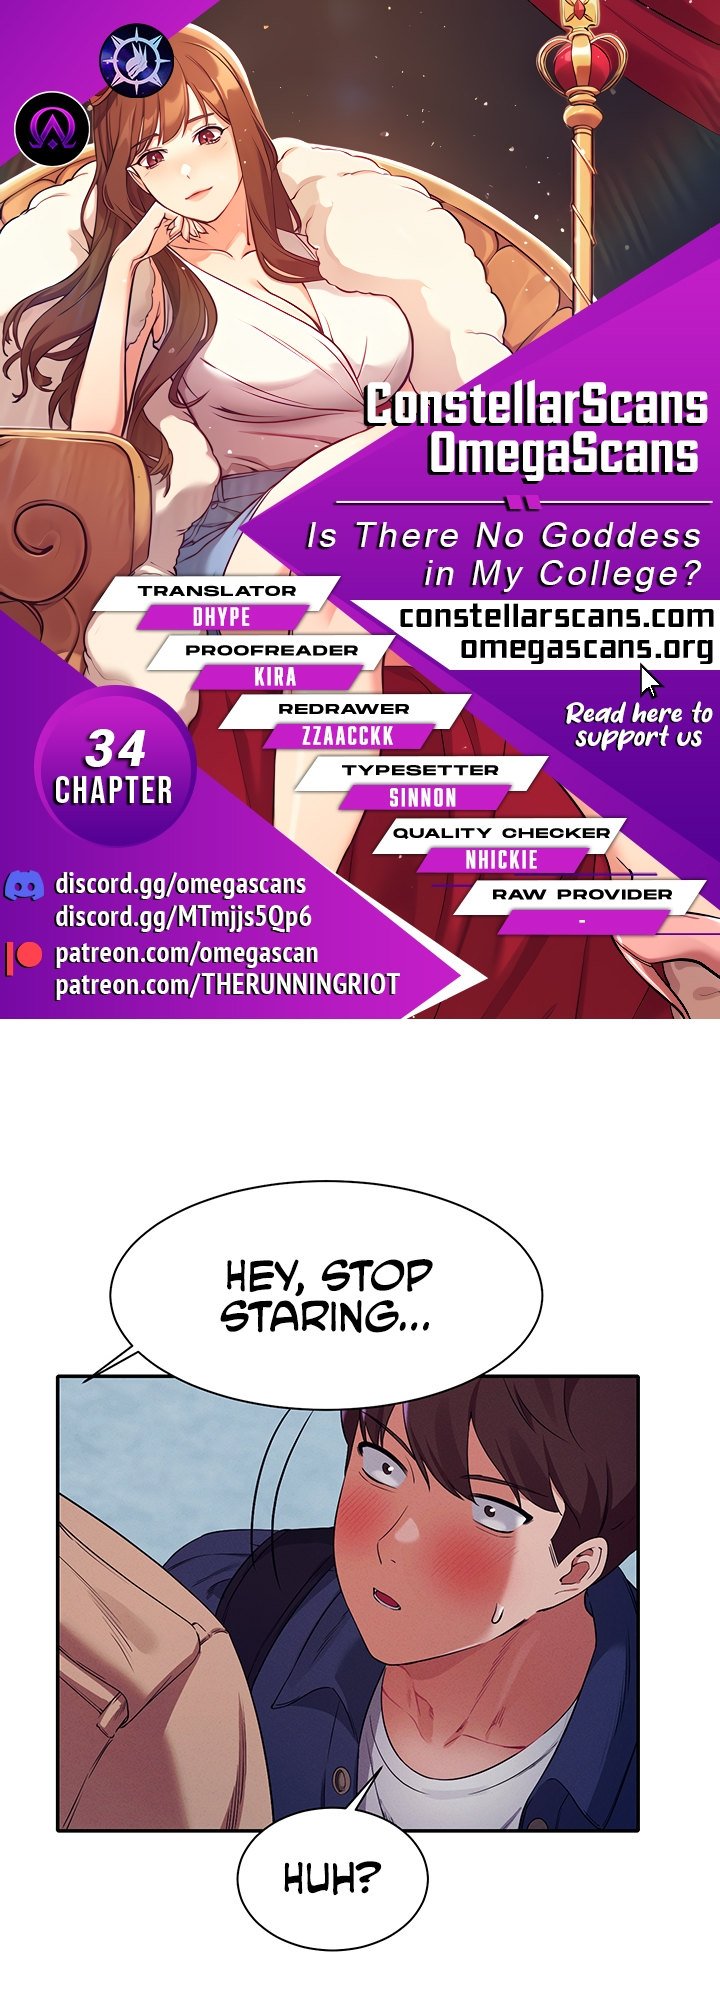 is-there-no-goddess-in-my-college-001-chap-34-0